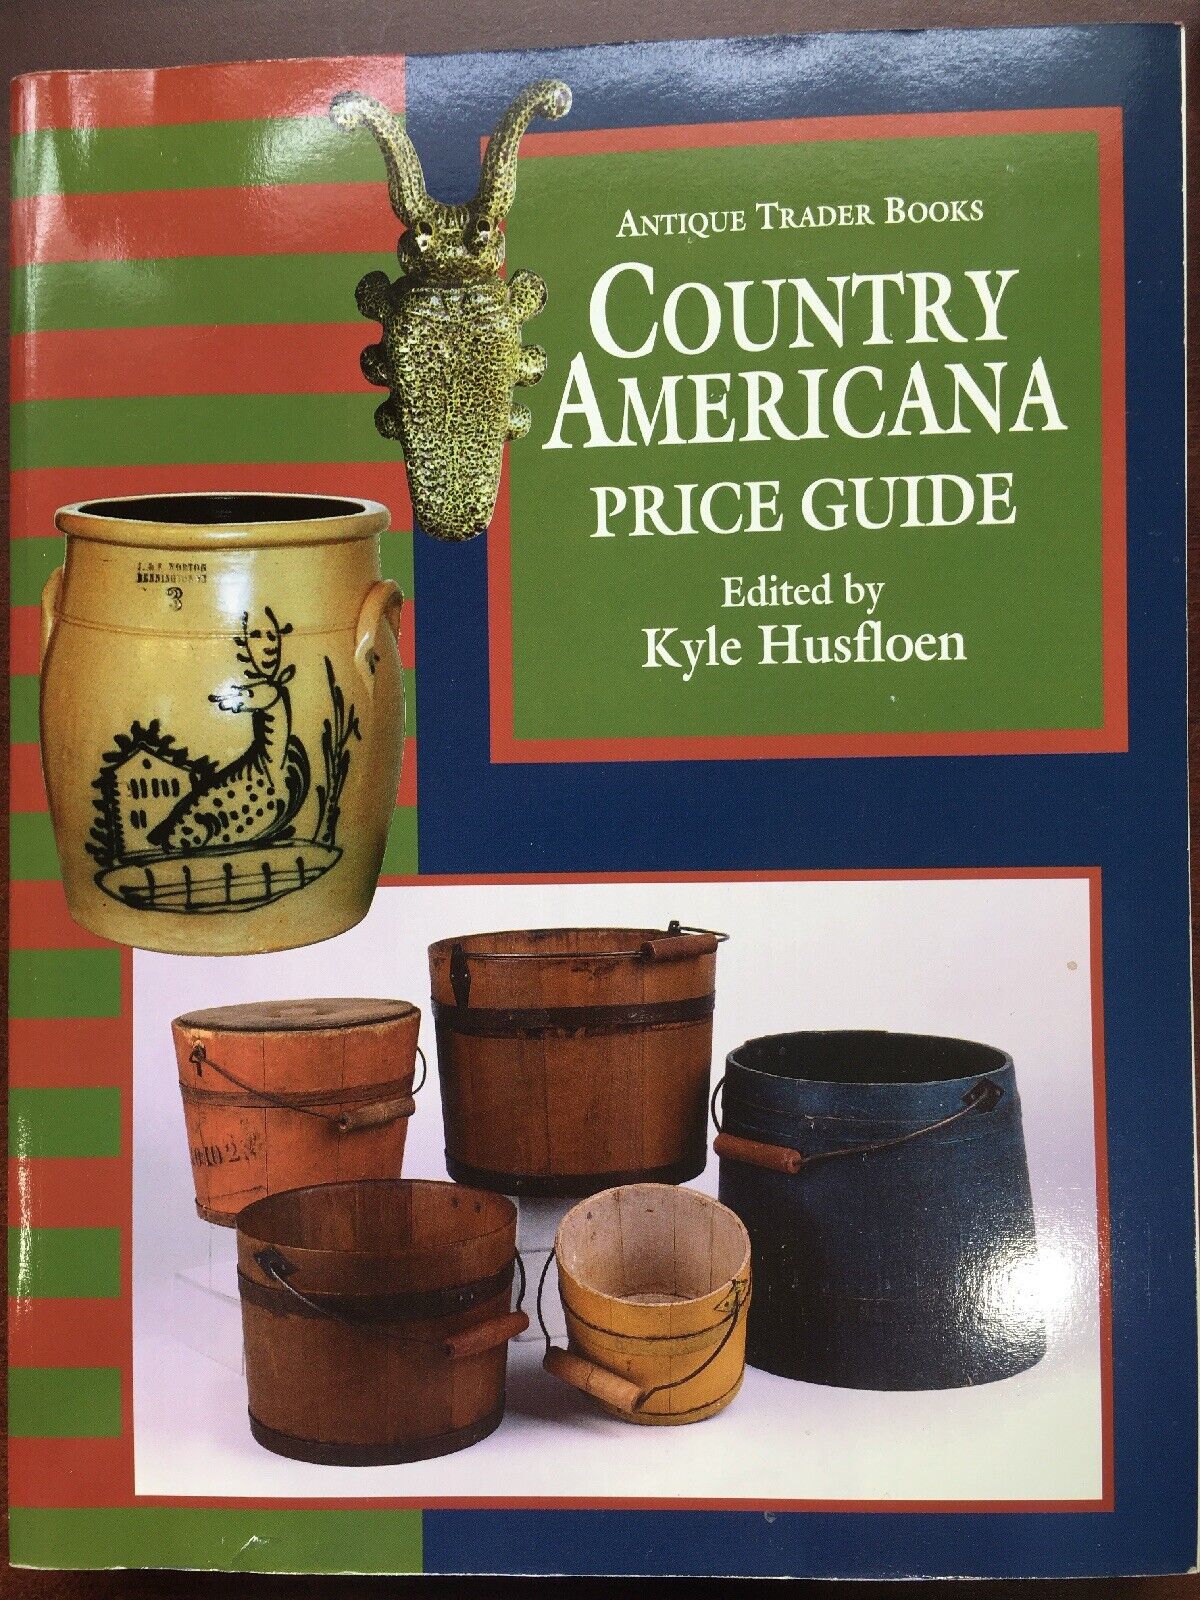 Mix To Book Light Country Americana Grotz’s Antique Guide American Collectibles Без бренда - фотография #6